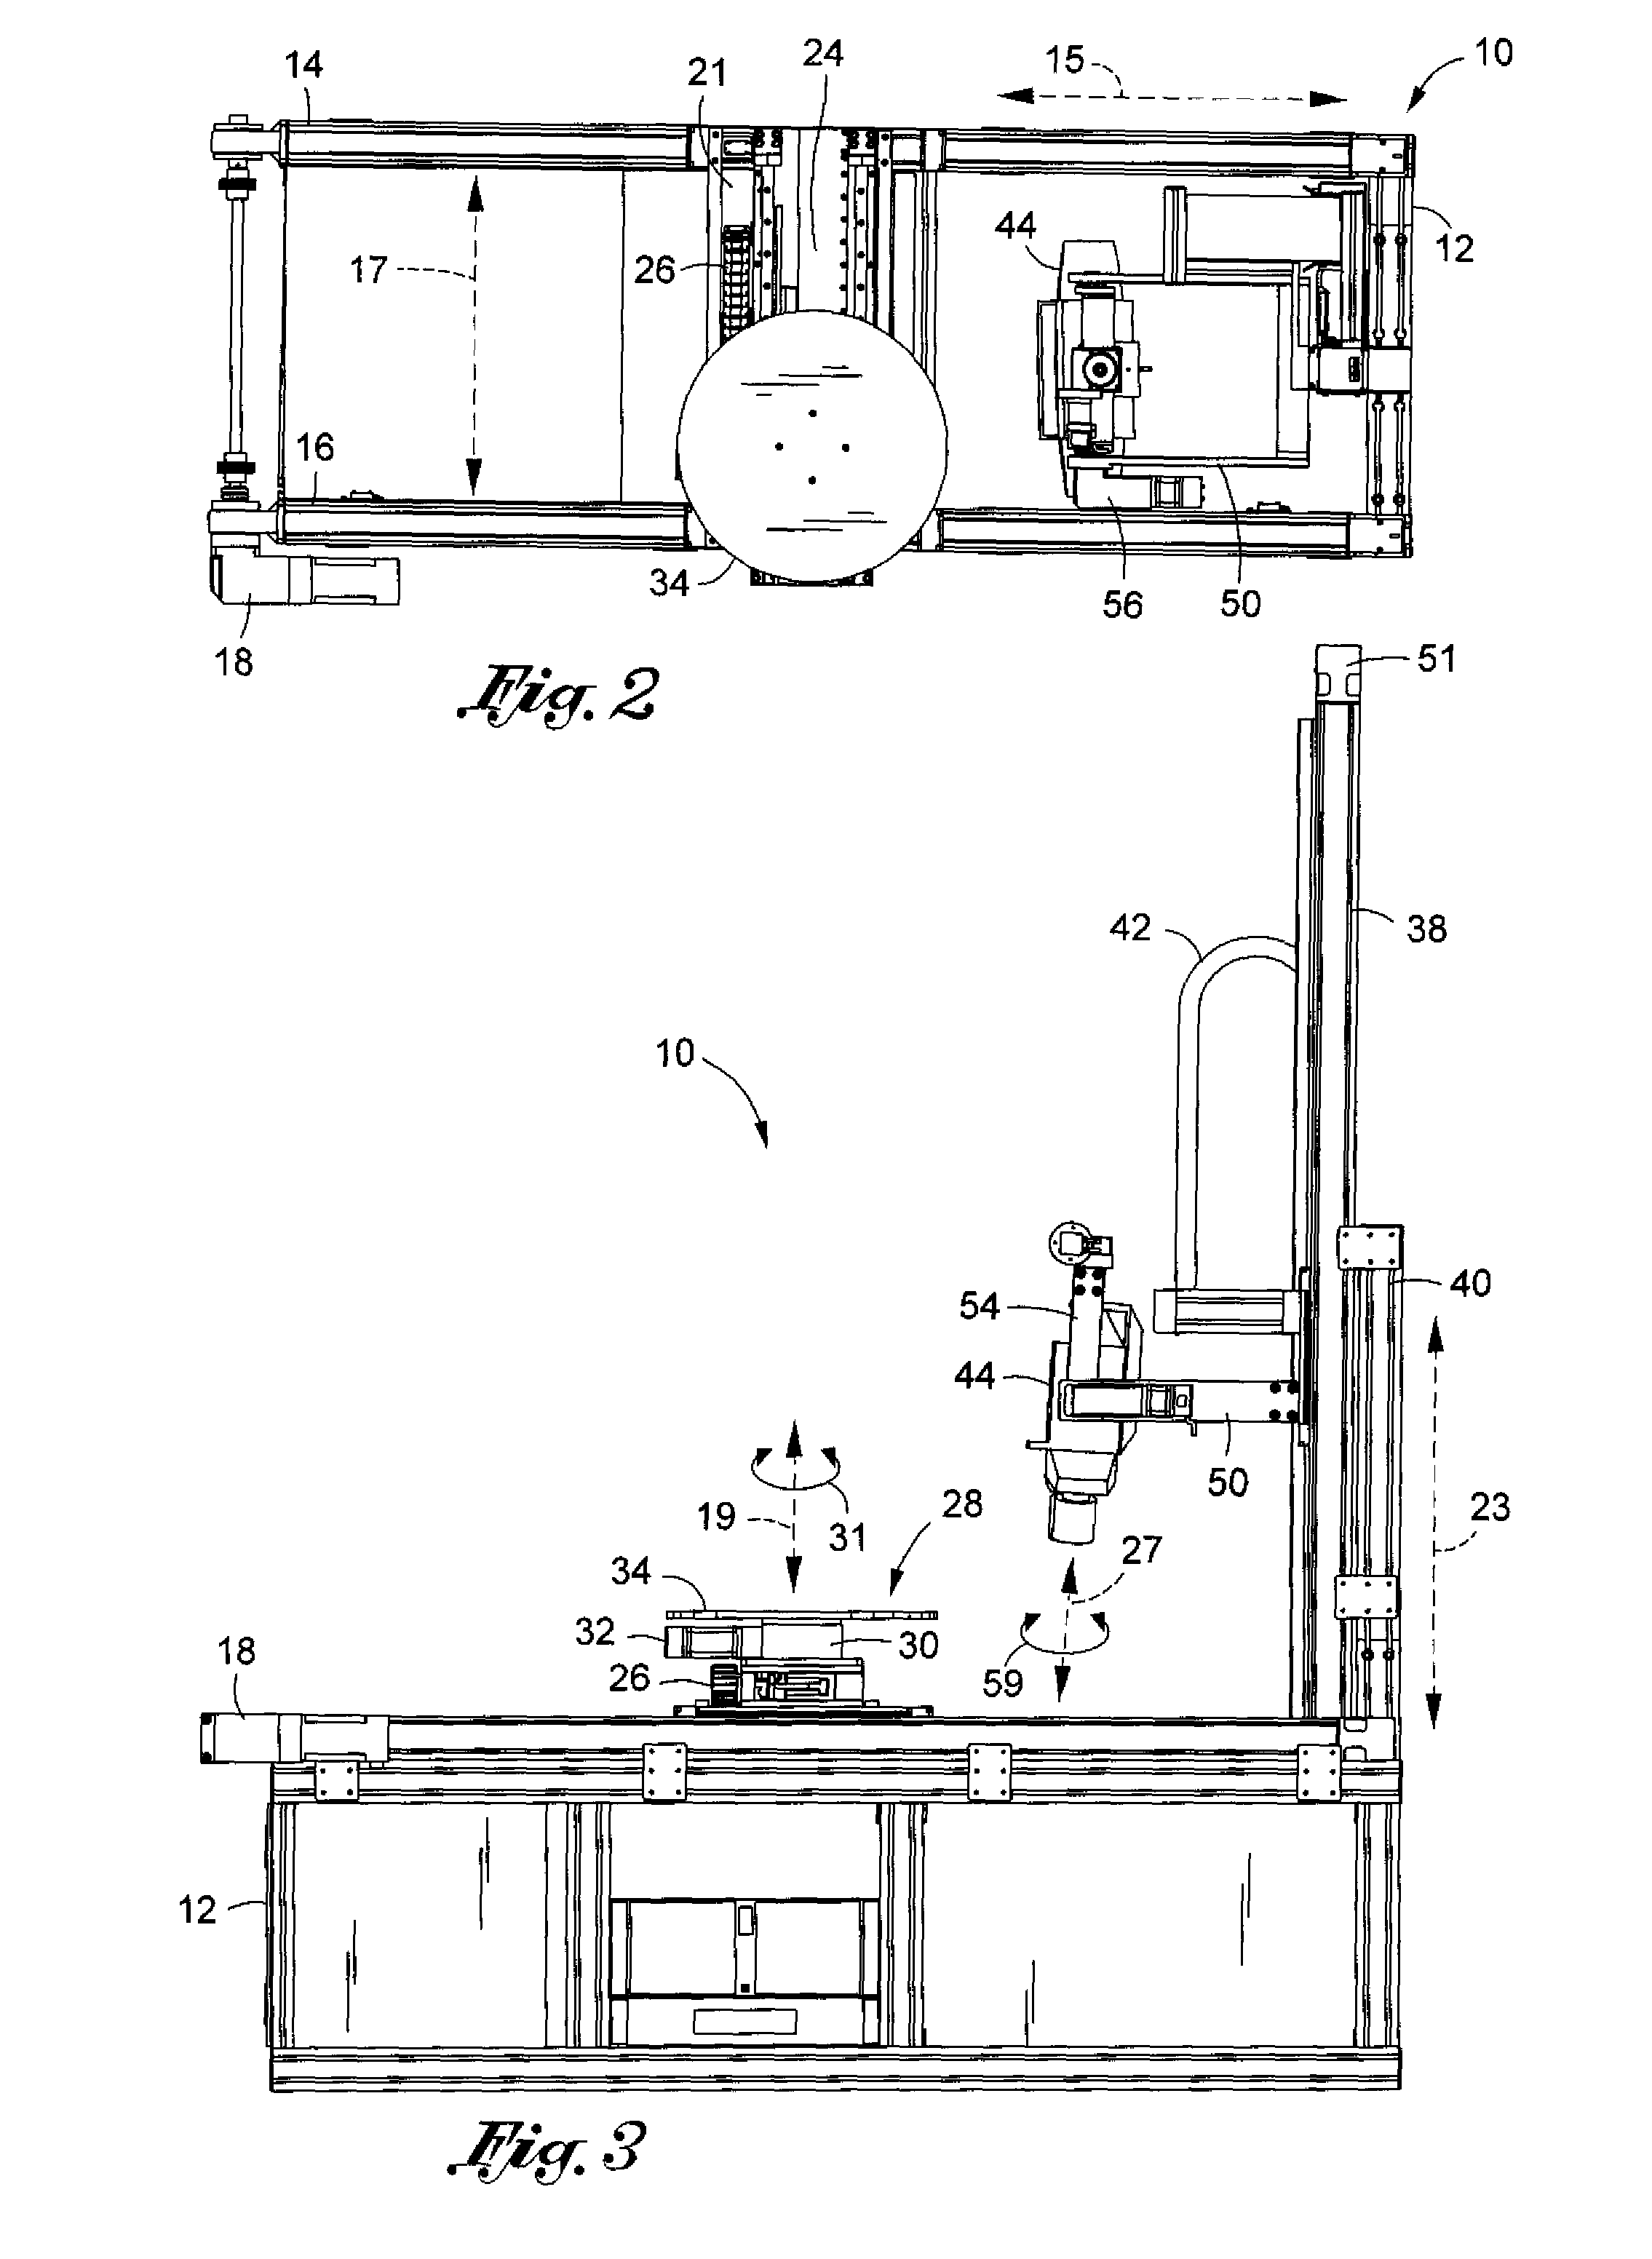 Six axis motion control apparatus